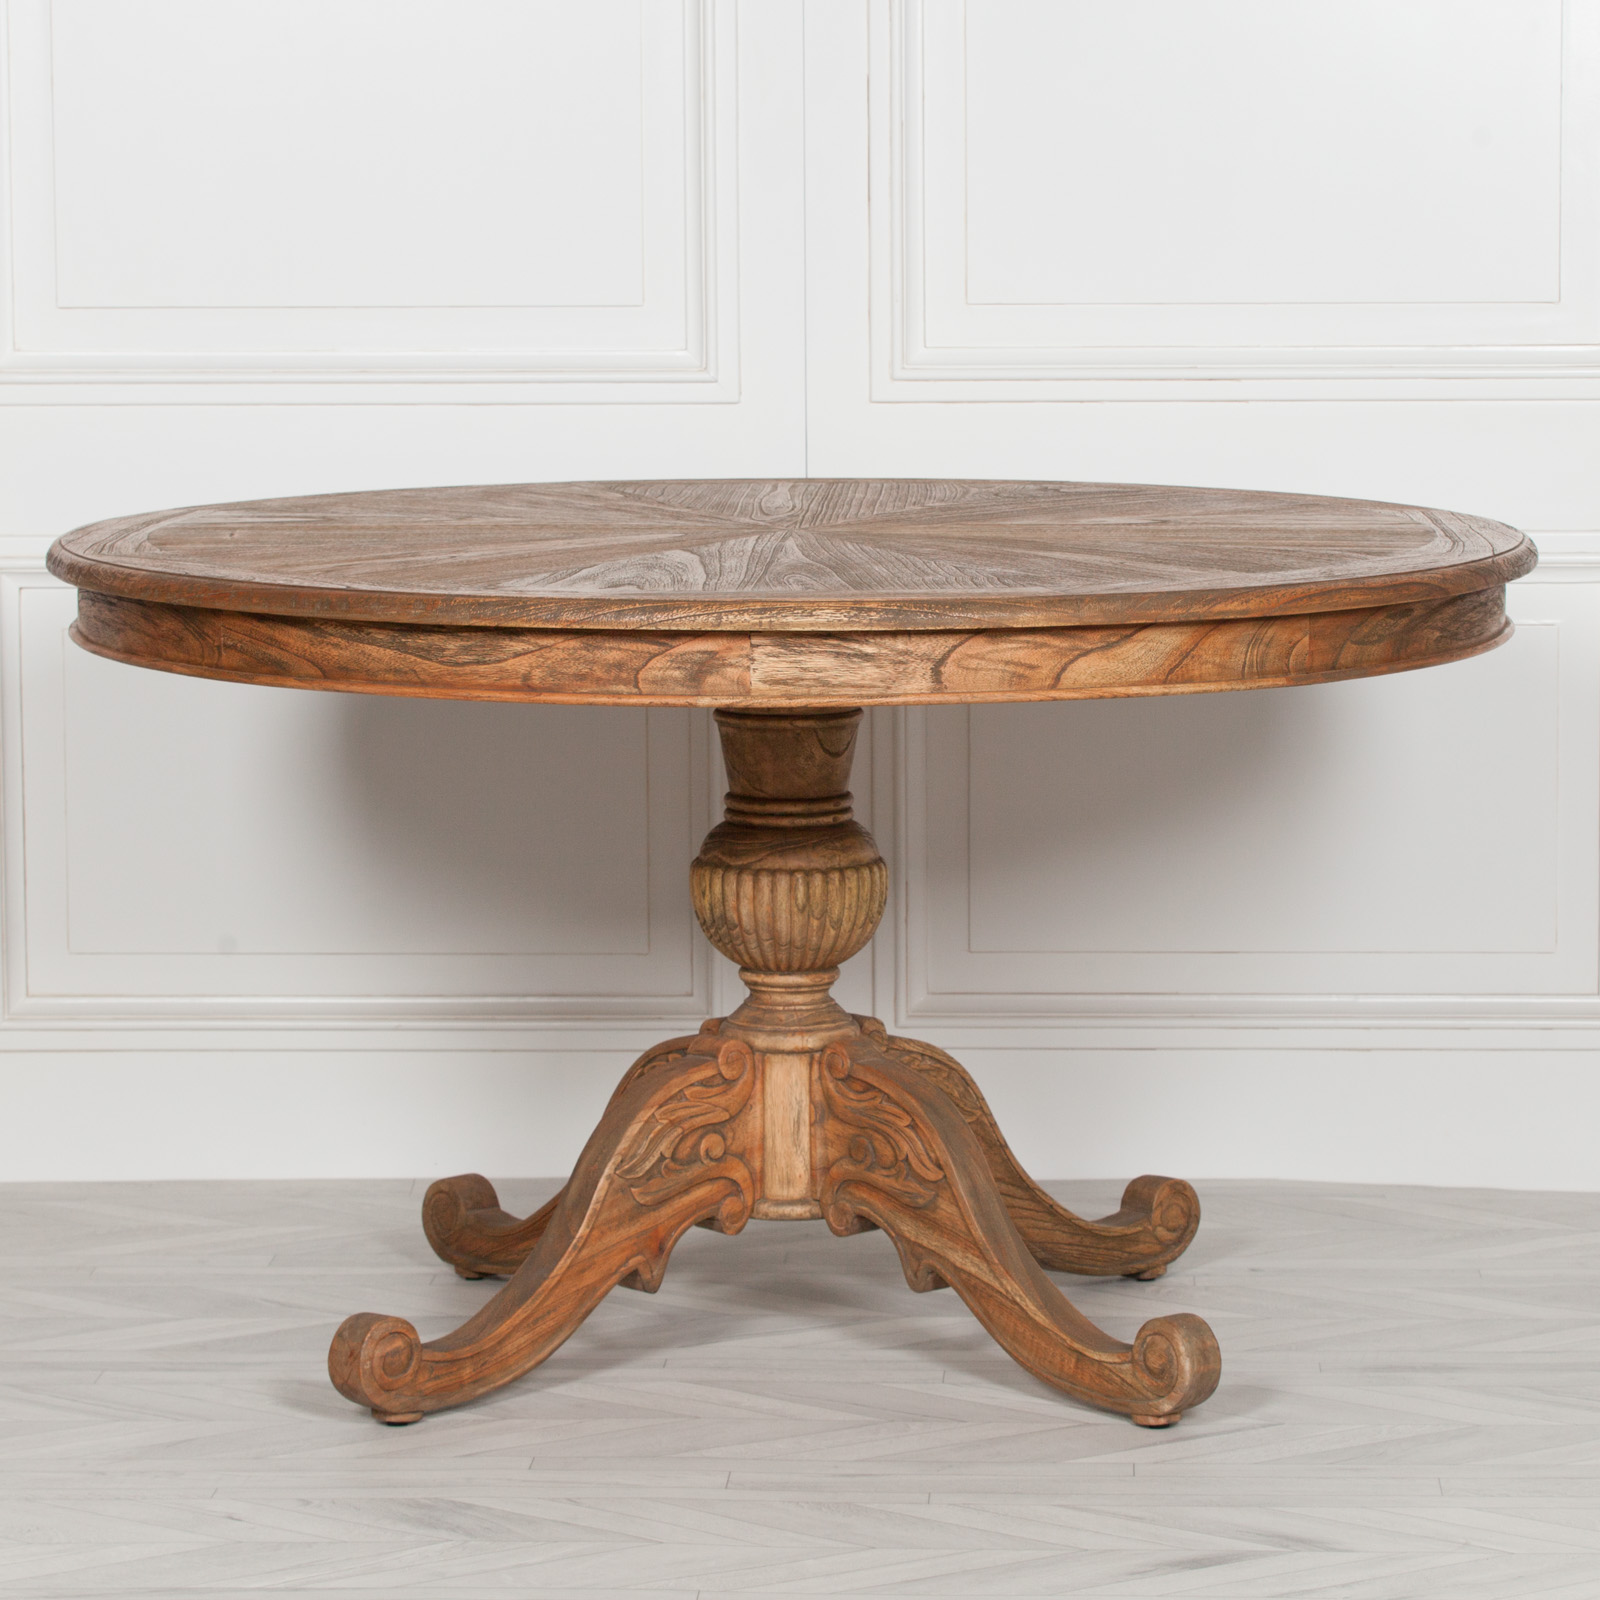 Alisanne Rustic Wooden Round Dining Table Furniture - La Maison Chic